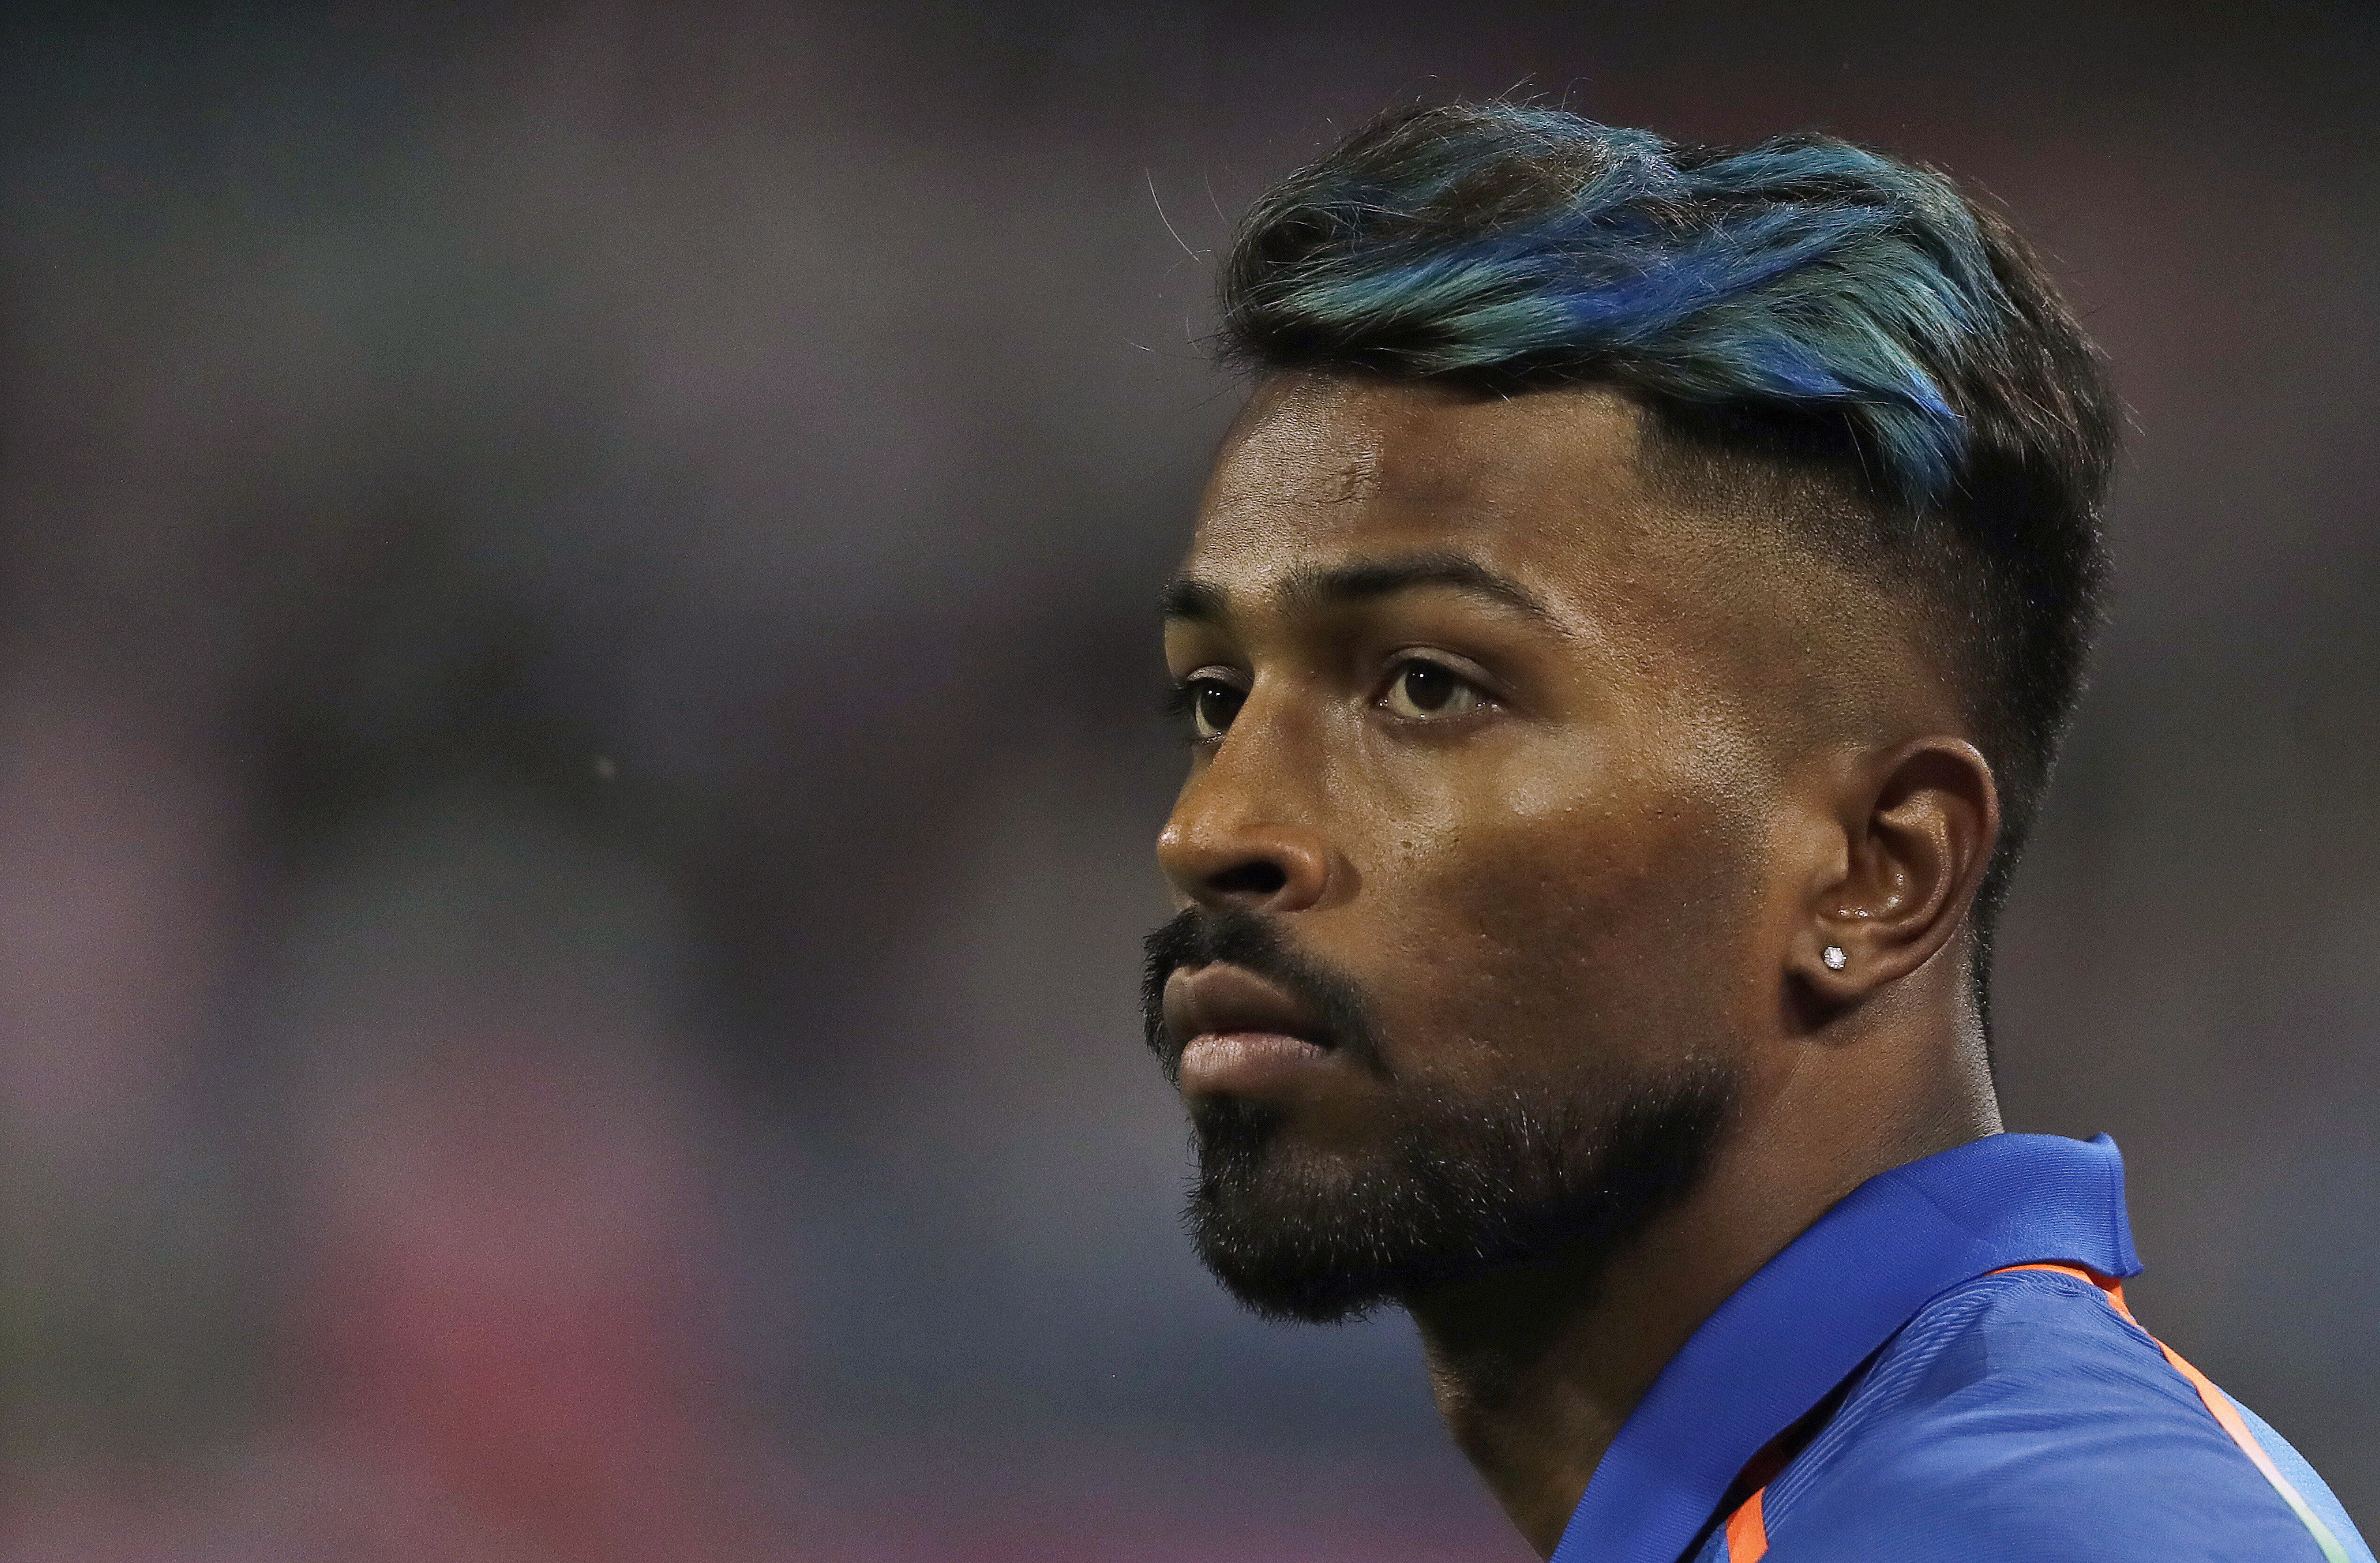 Pandya refuses to step out of home, says father